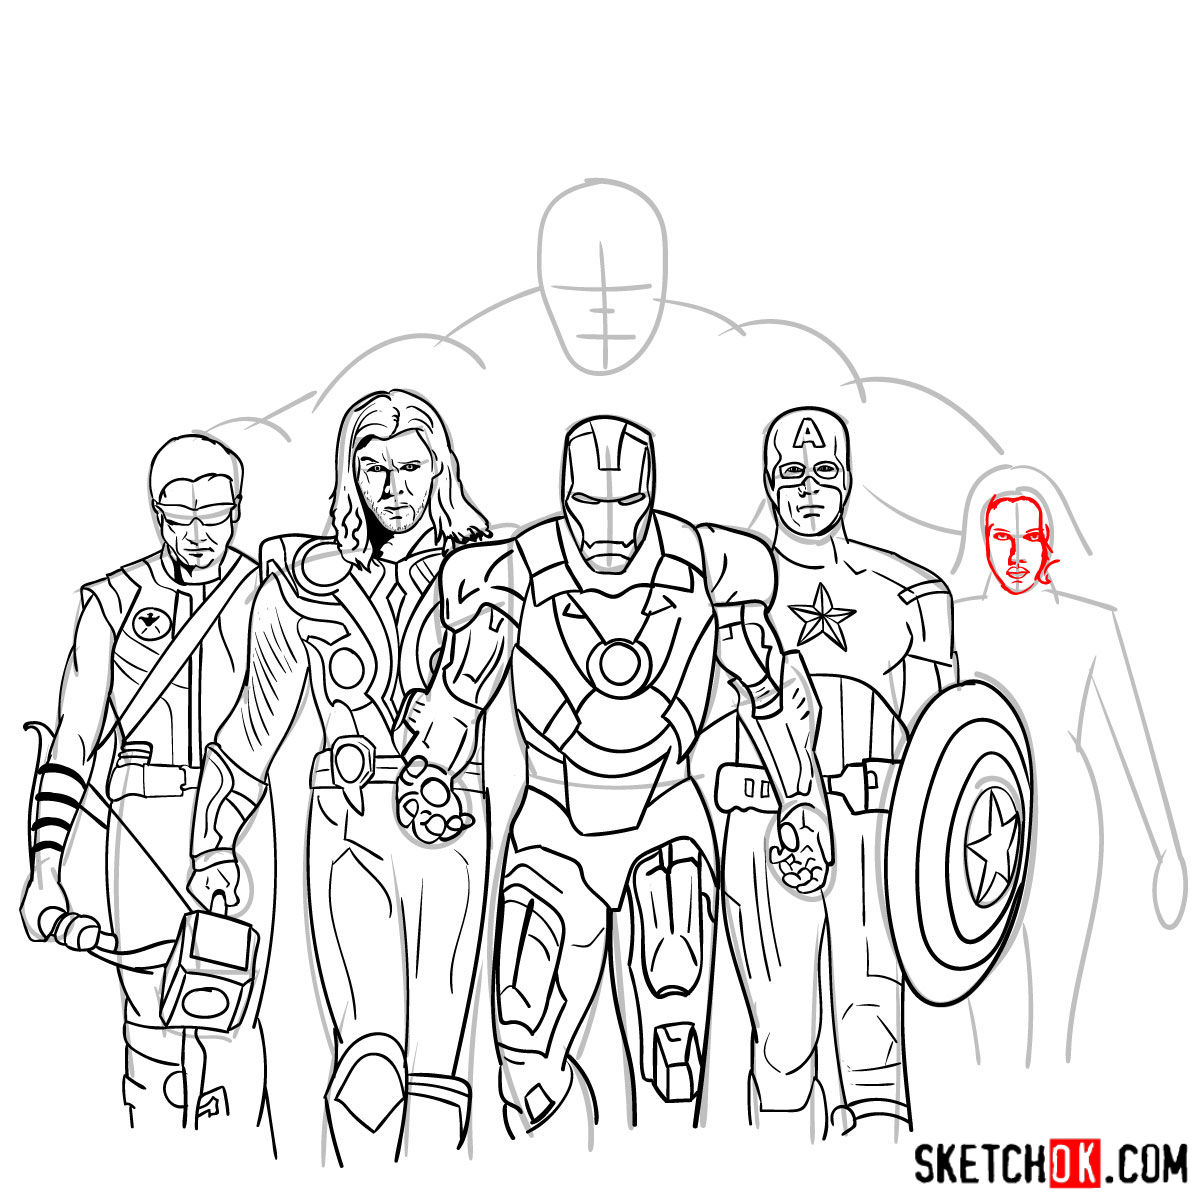 how to draw marvel superheroes book